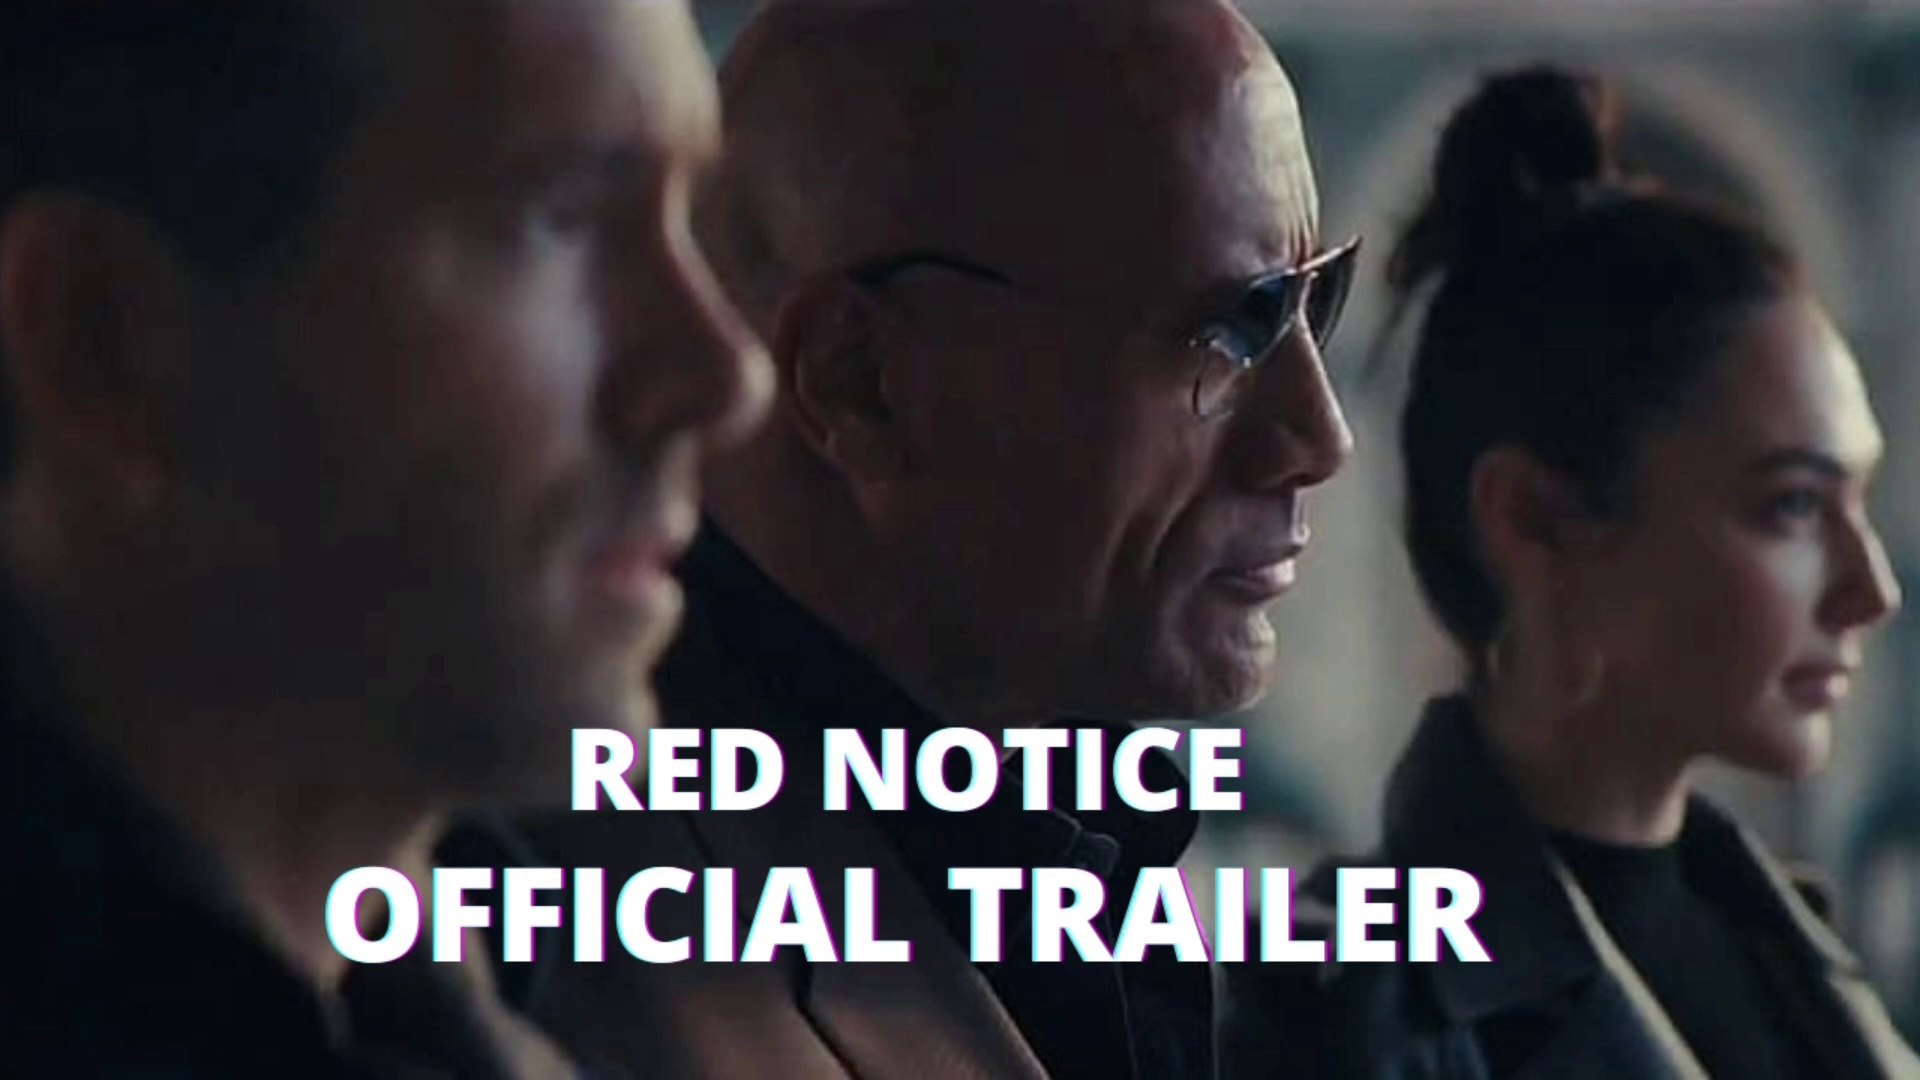 RED NOTICE, Official Trailer